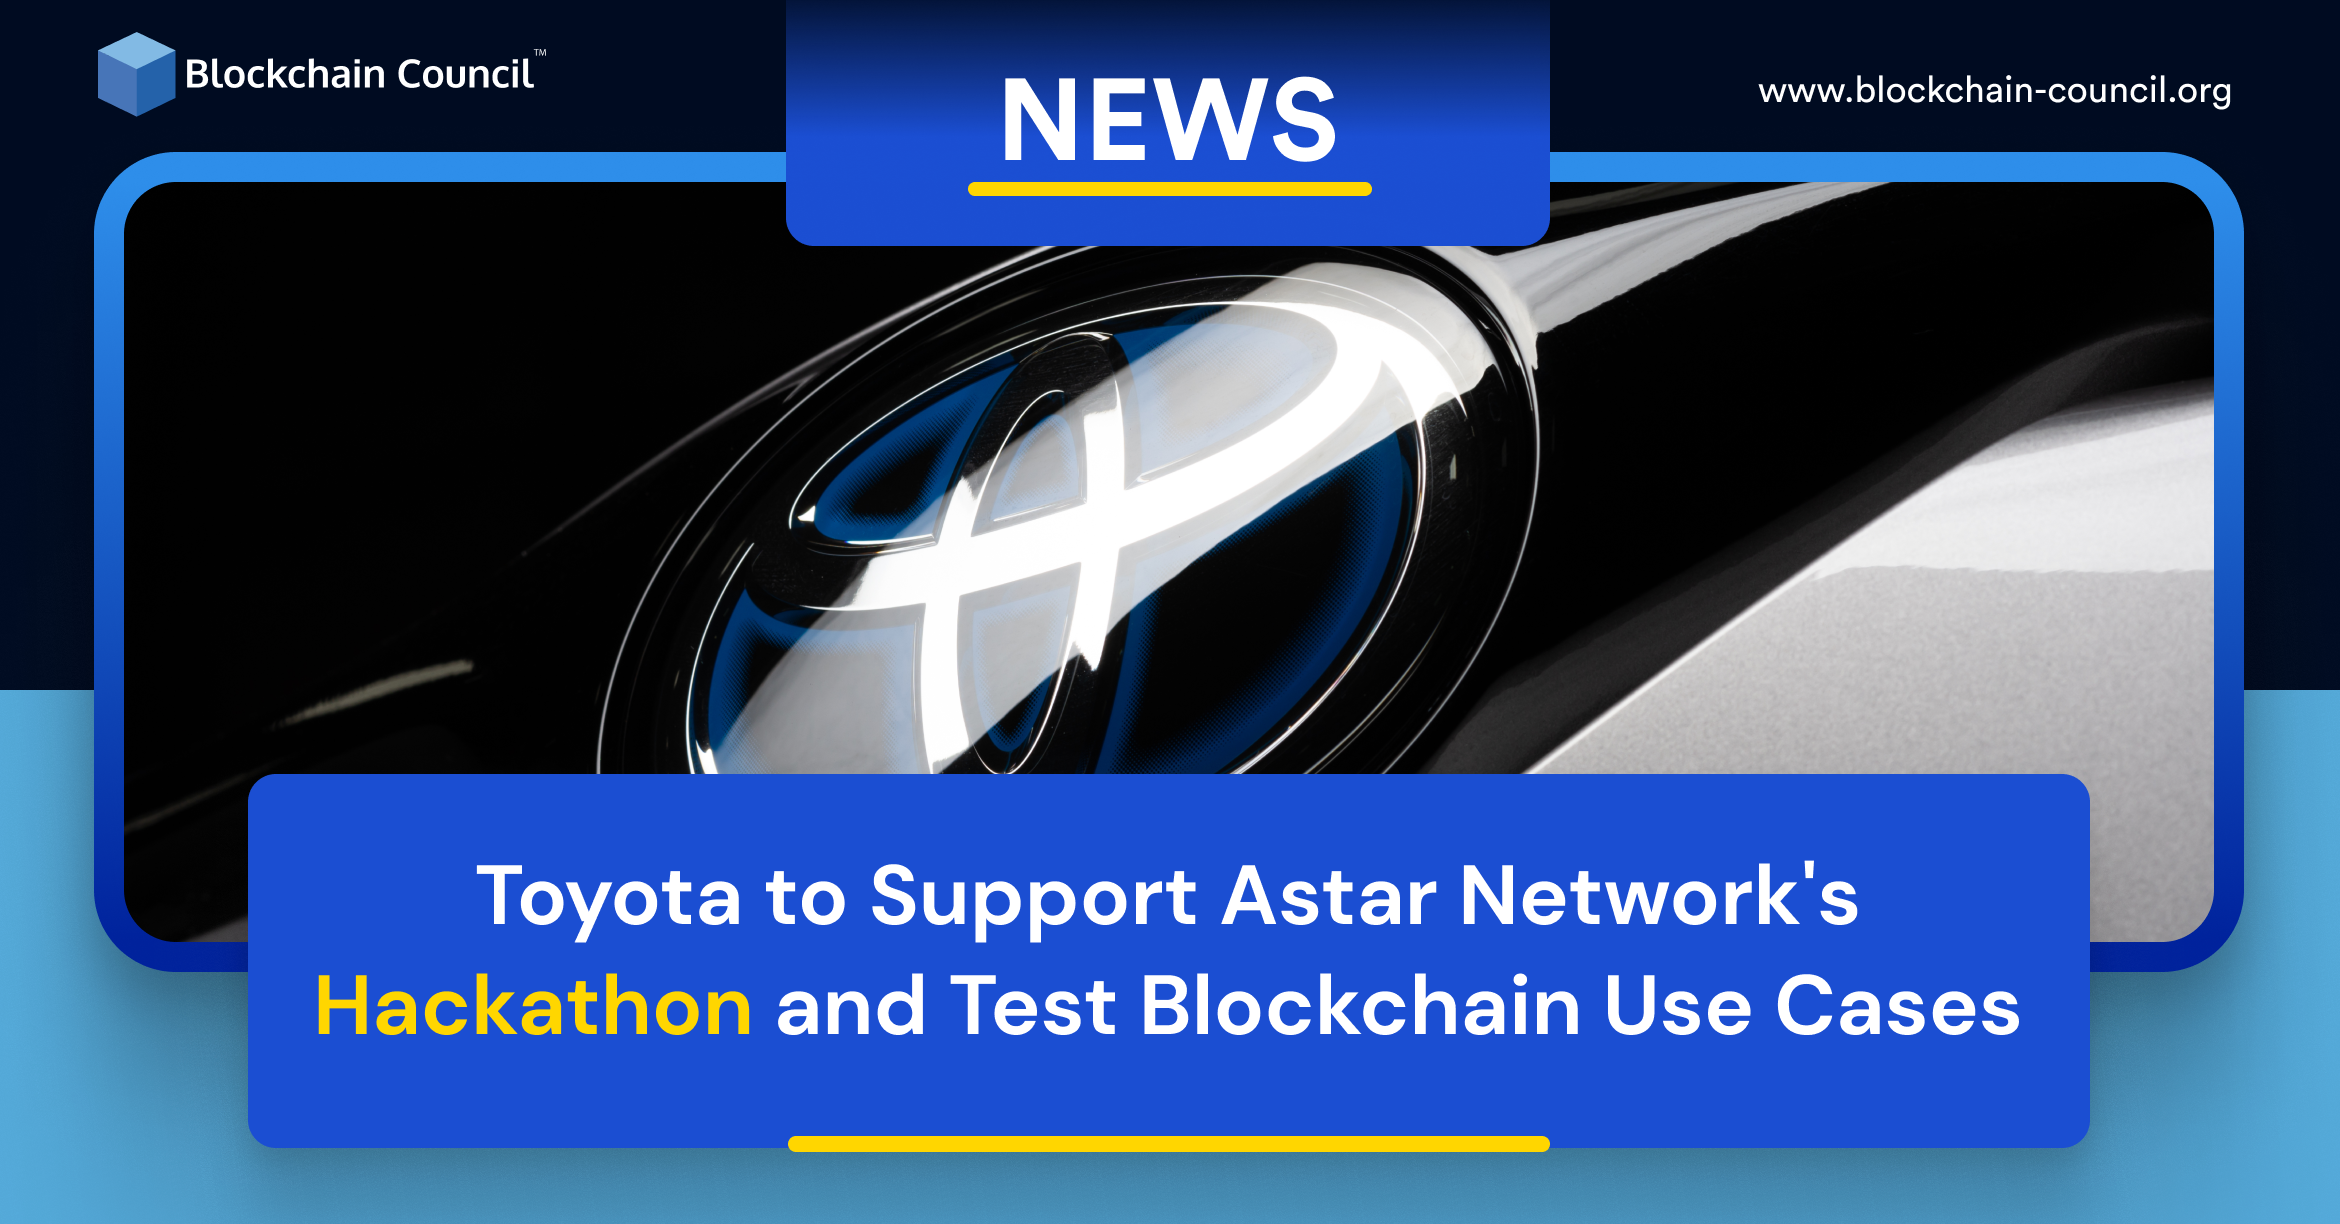 Toyota to Support Astar Network's Hackathon and Test Blockchain Use Cases